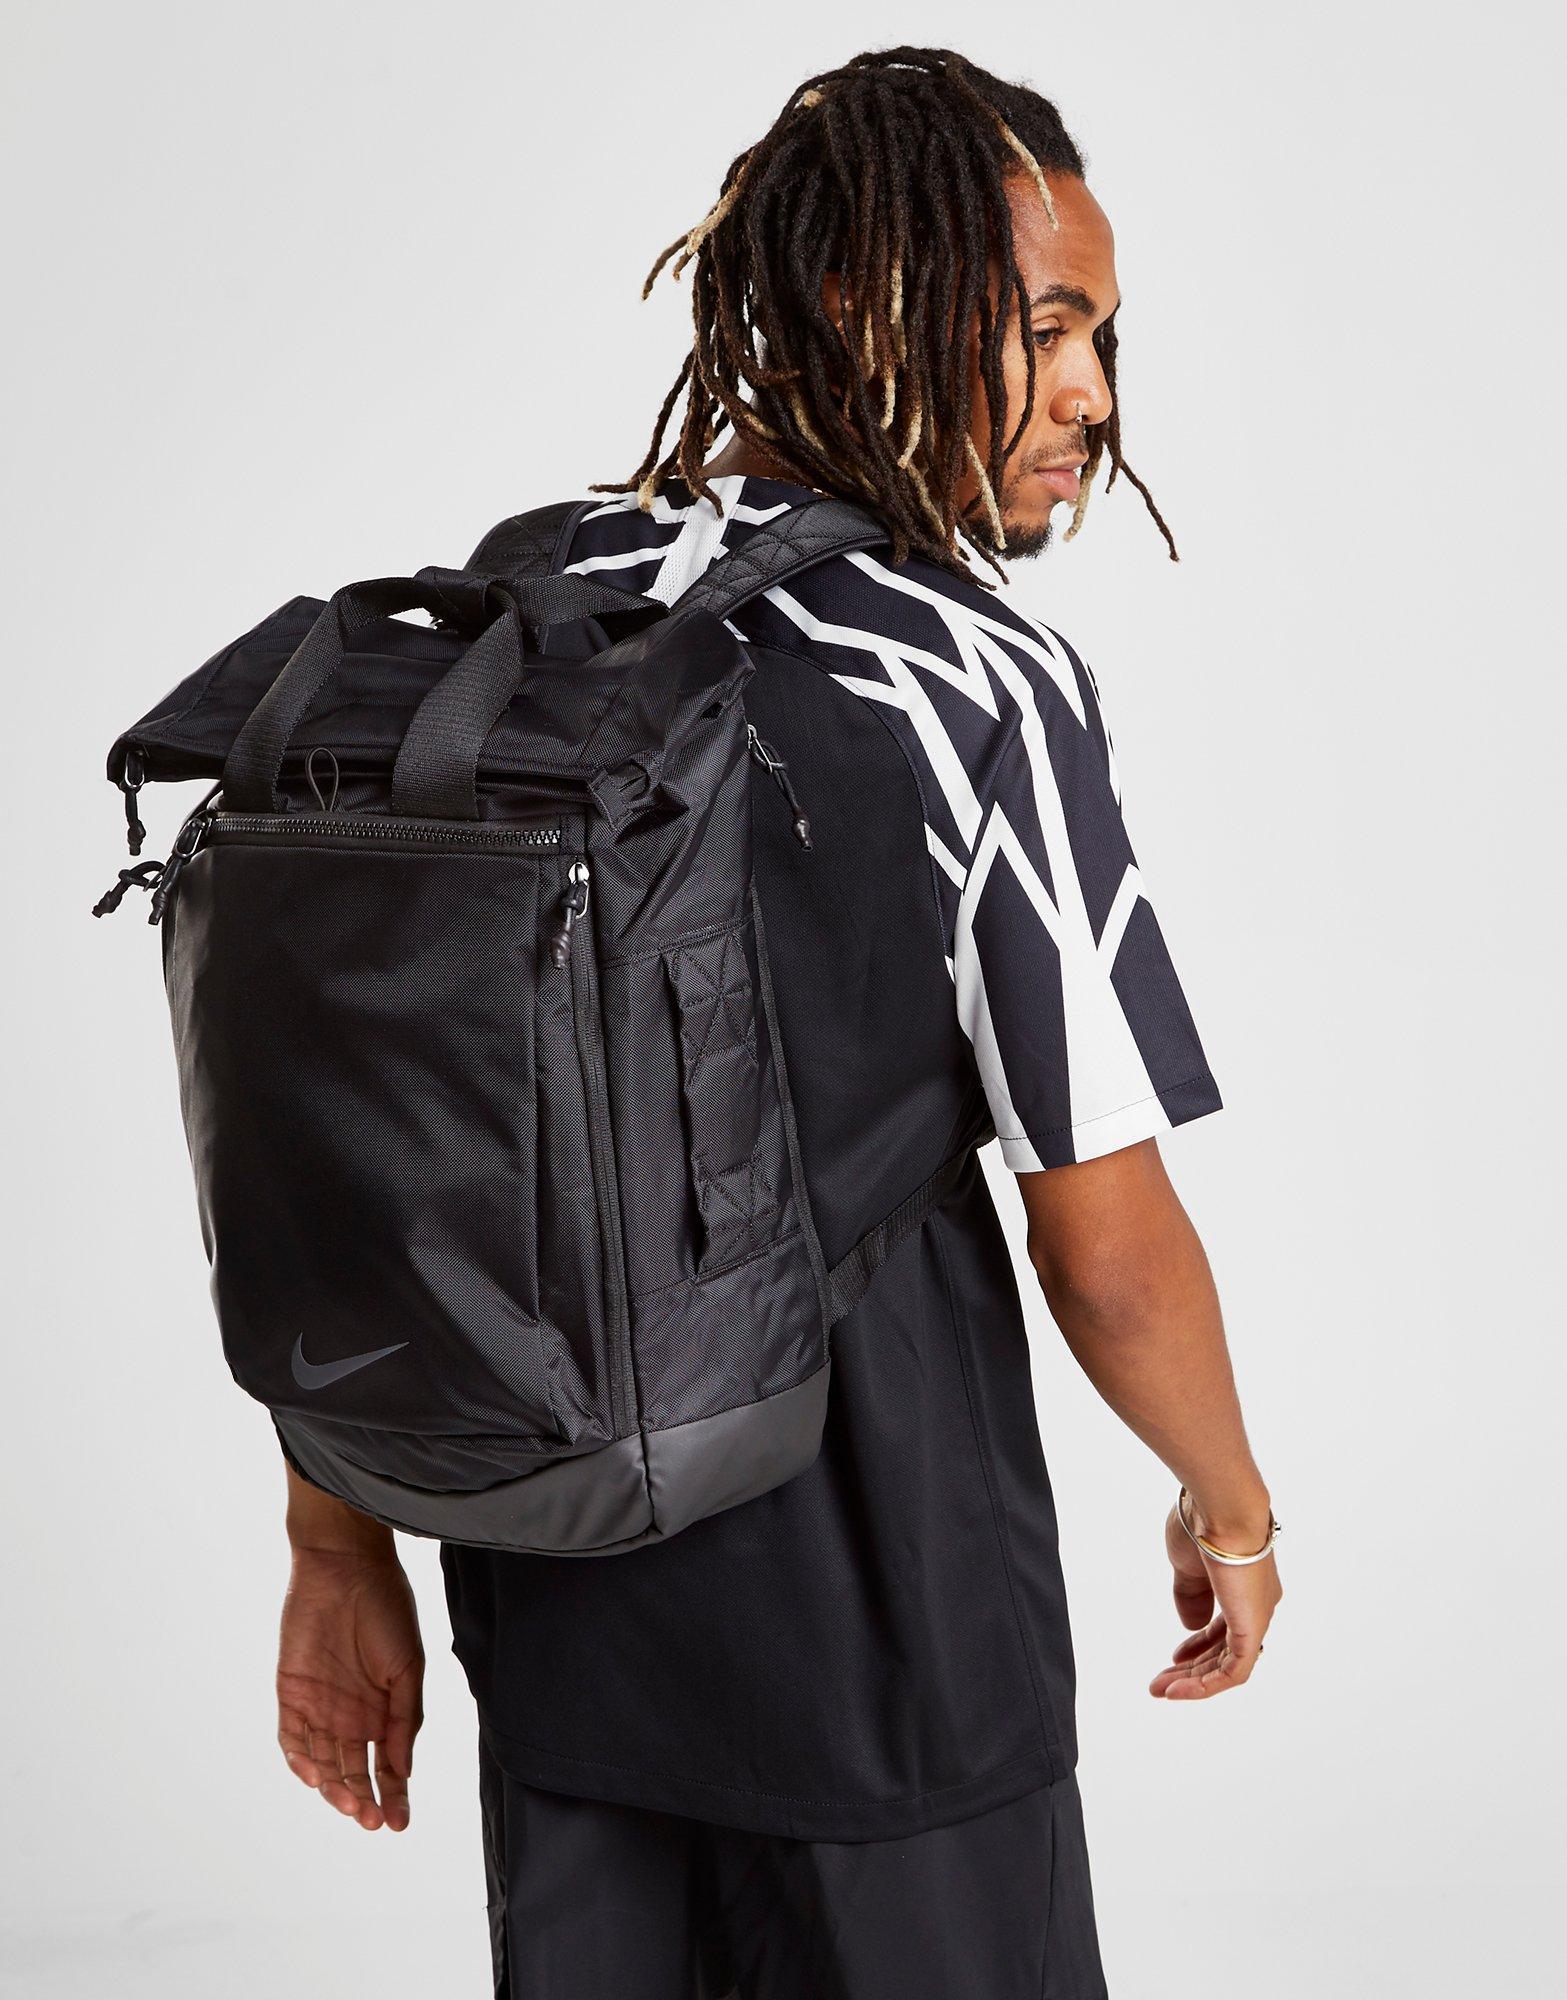 nike radiate rucksack buy clothes shoes online